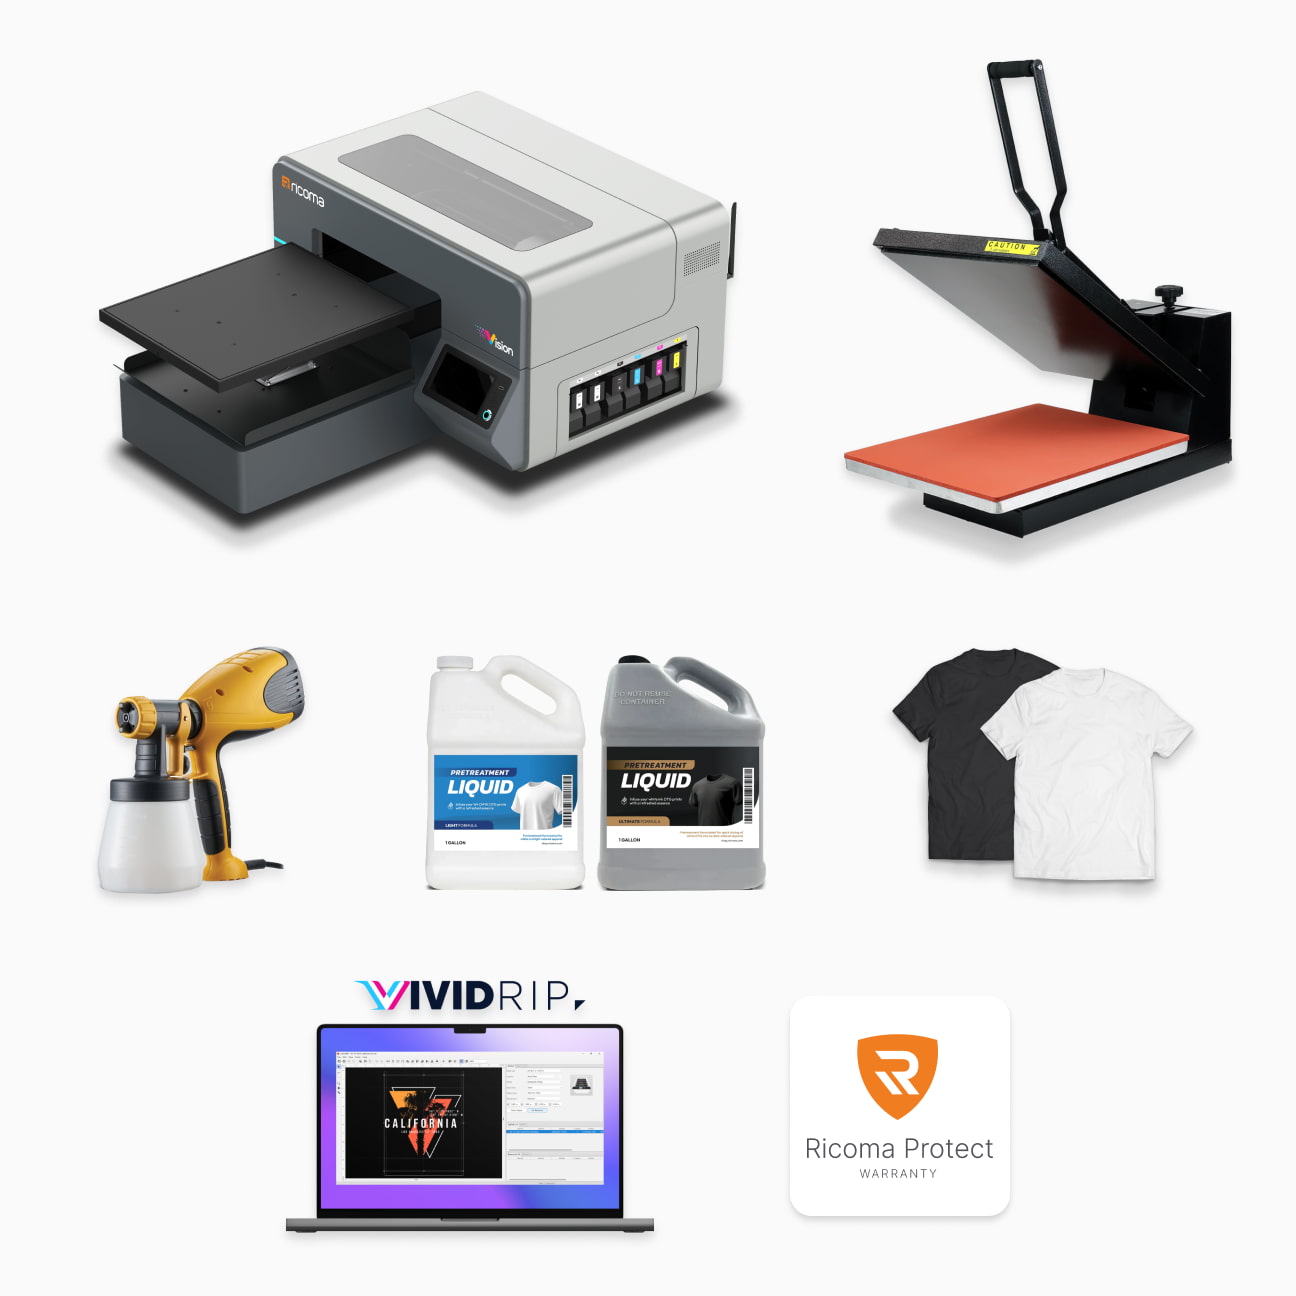 Vision DTG Printer,iKonix Manual 16” x 20” Flat Heat Press,Wagner sprayer,SonicJet Pretreatment Starter Kit (32oz of Light and 32oz of Ultimate),Pretreated shirt samples (2),VividRIP Software (Mac and PC compatible)